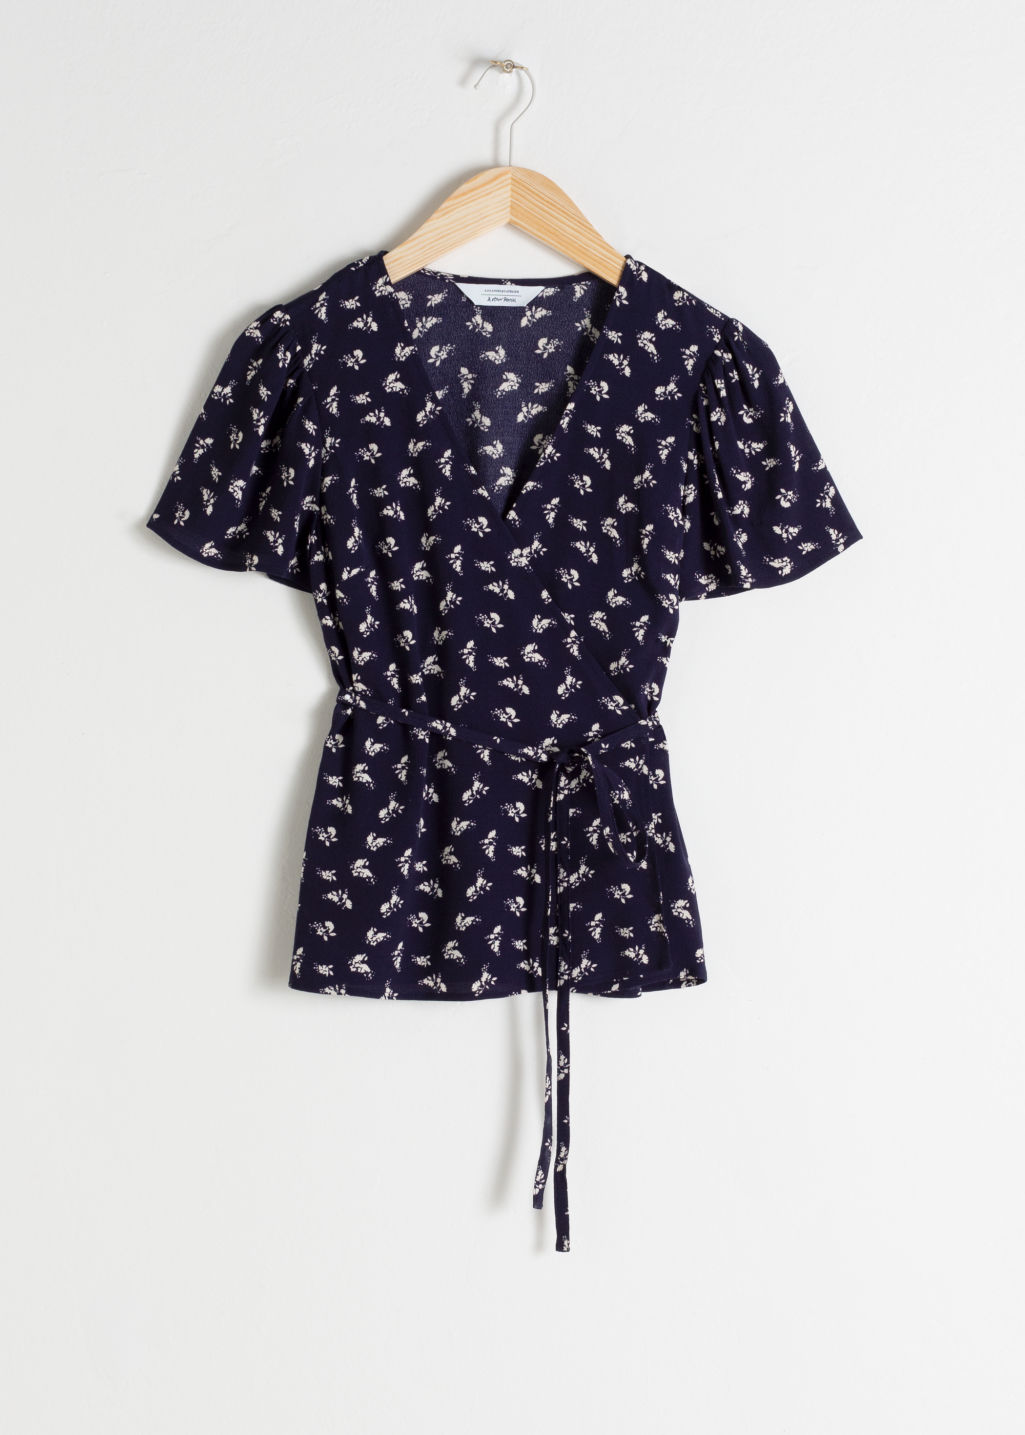 & Other Stories Floral Wrap Blouse